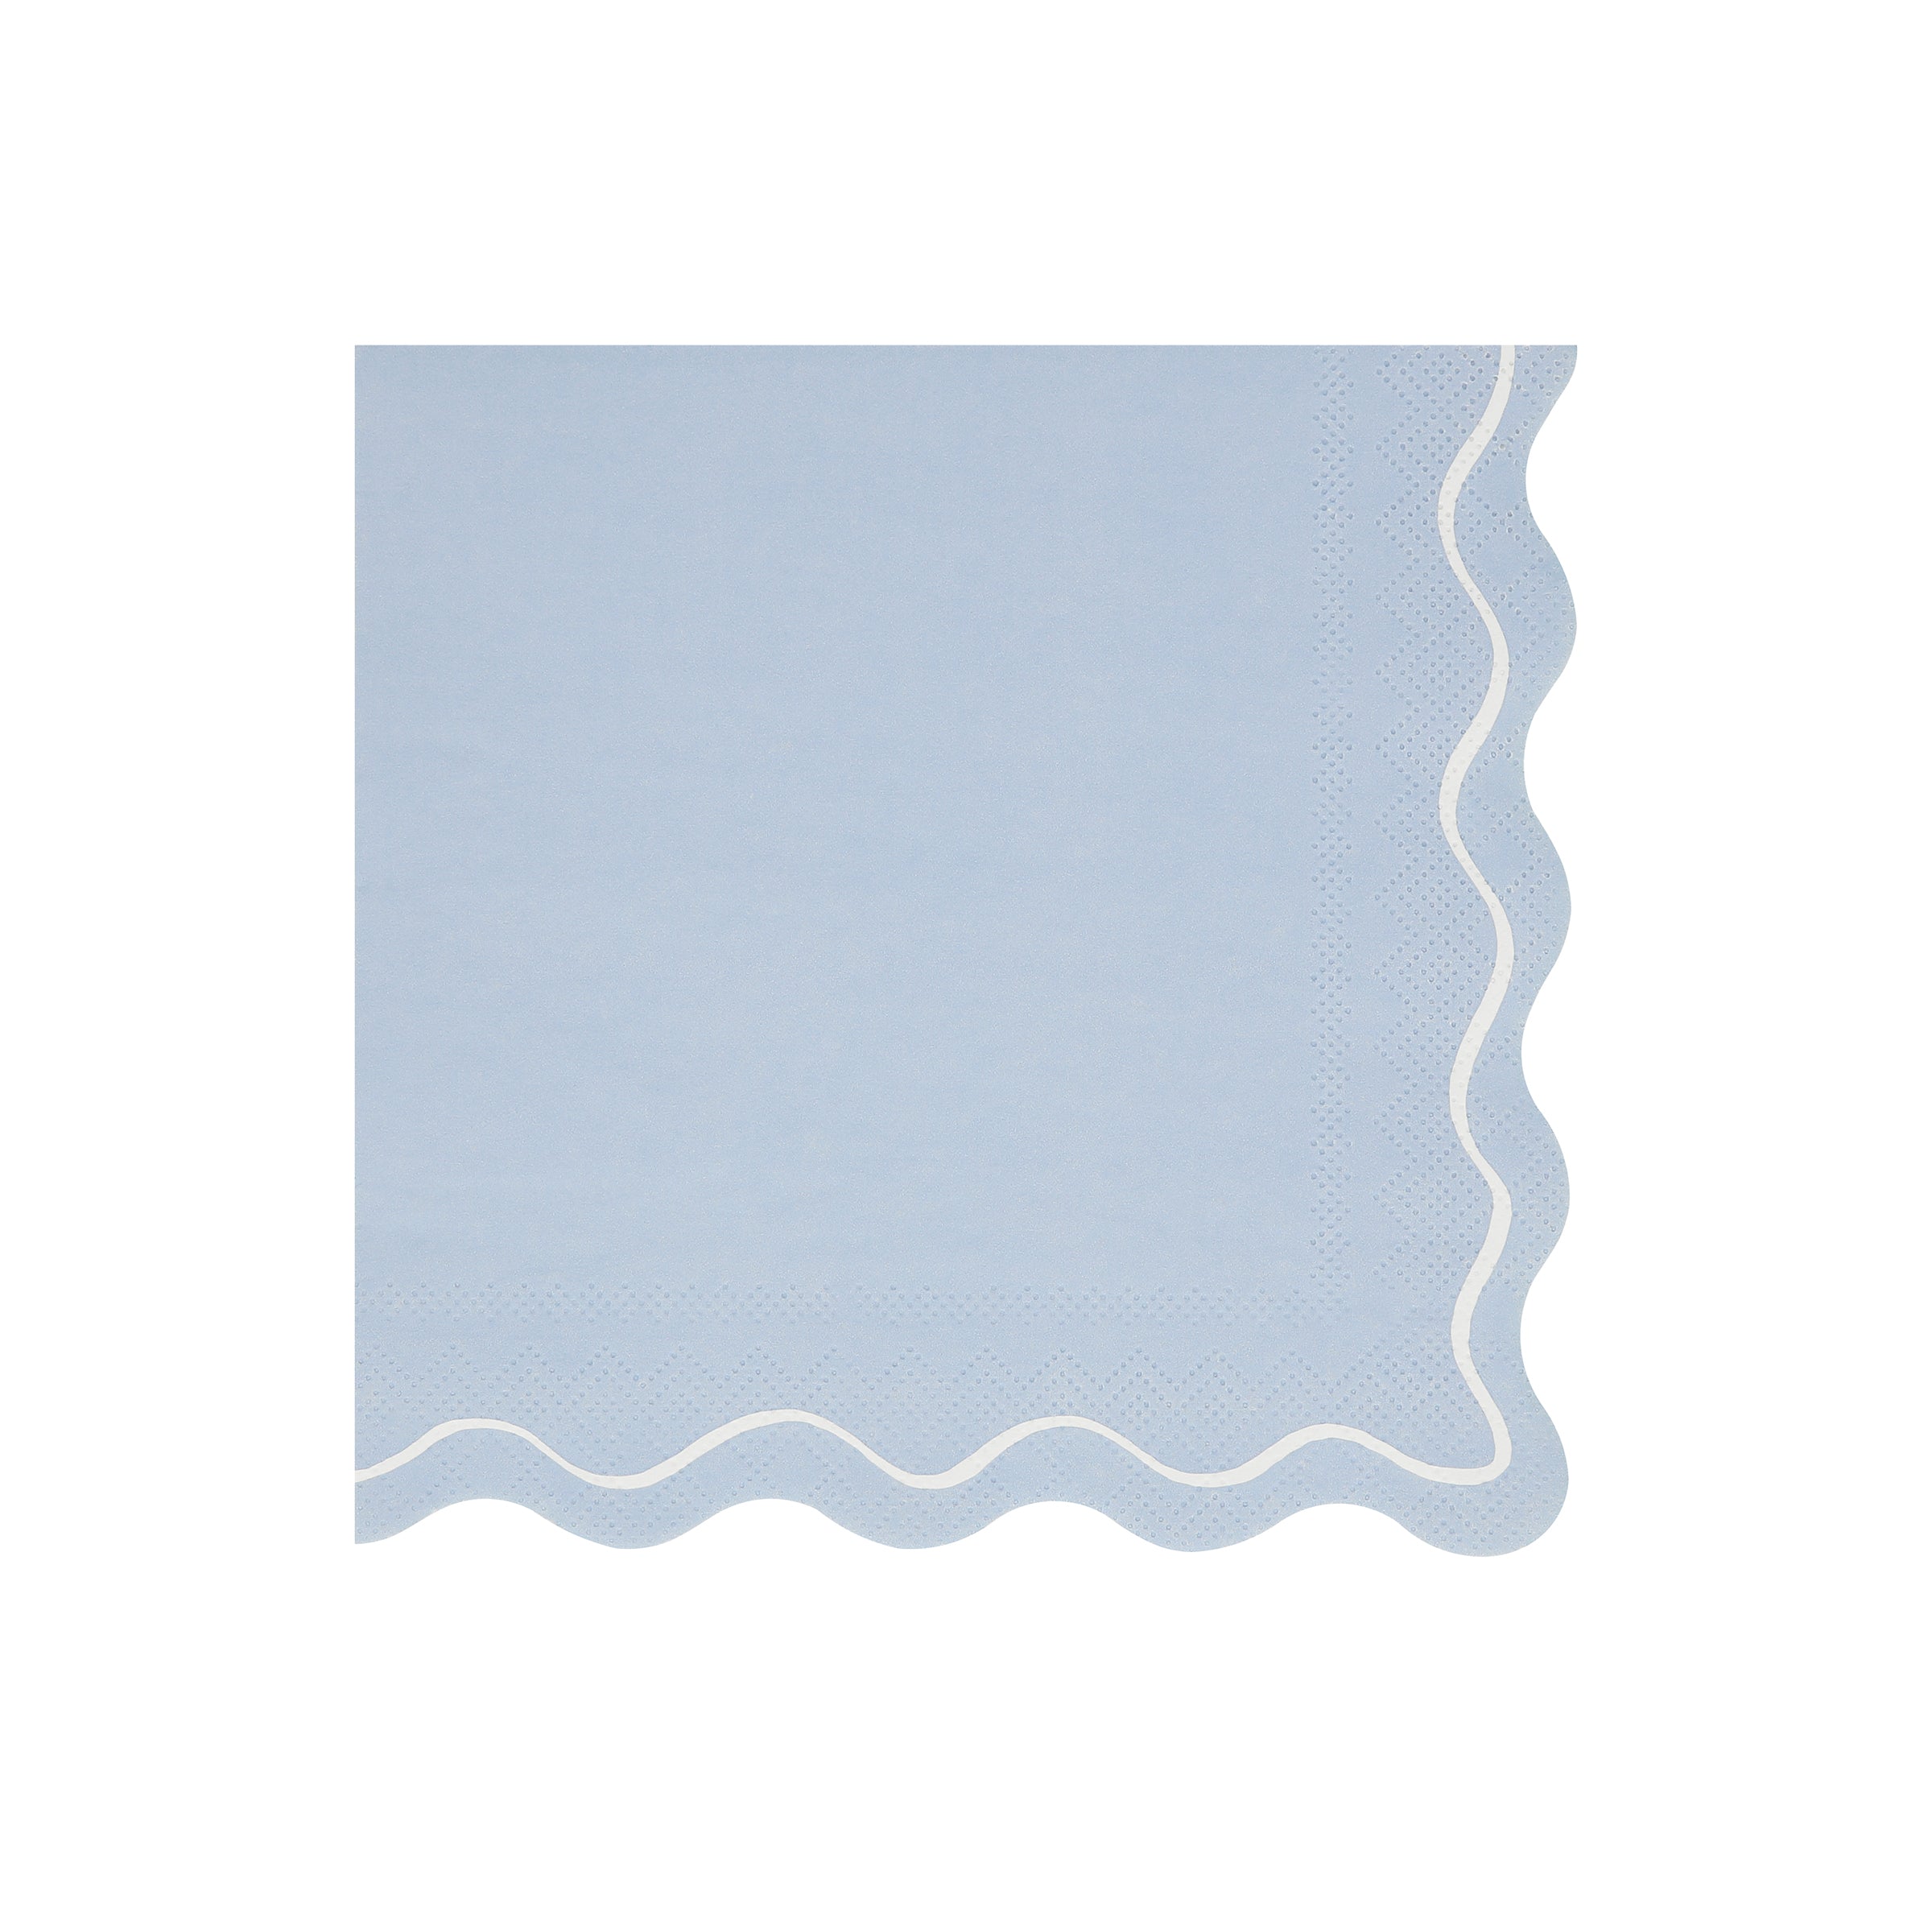 Our paper napkins have gorgeous colors, a scalloped edge and a wavy line design, the perfect party napkins.